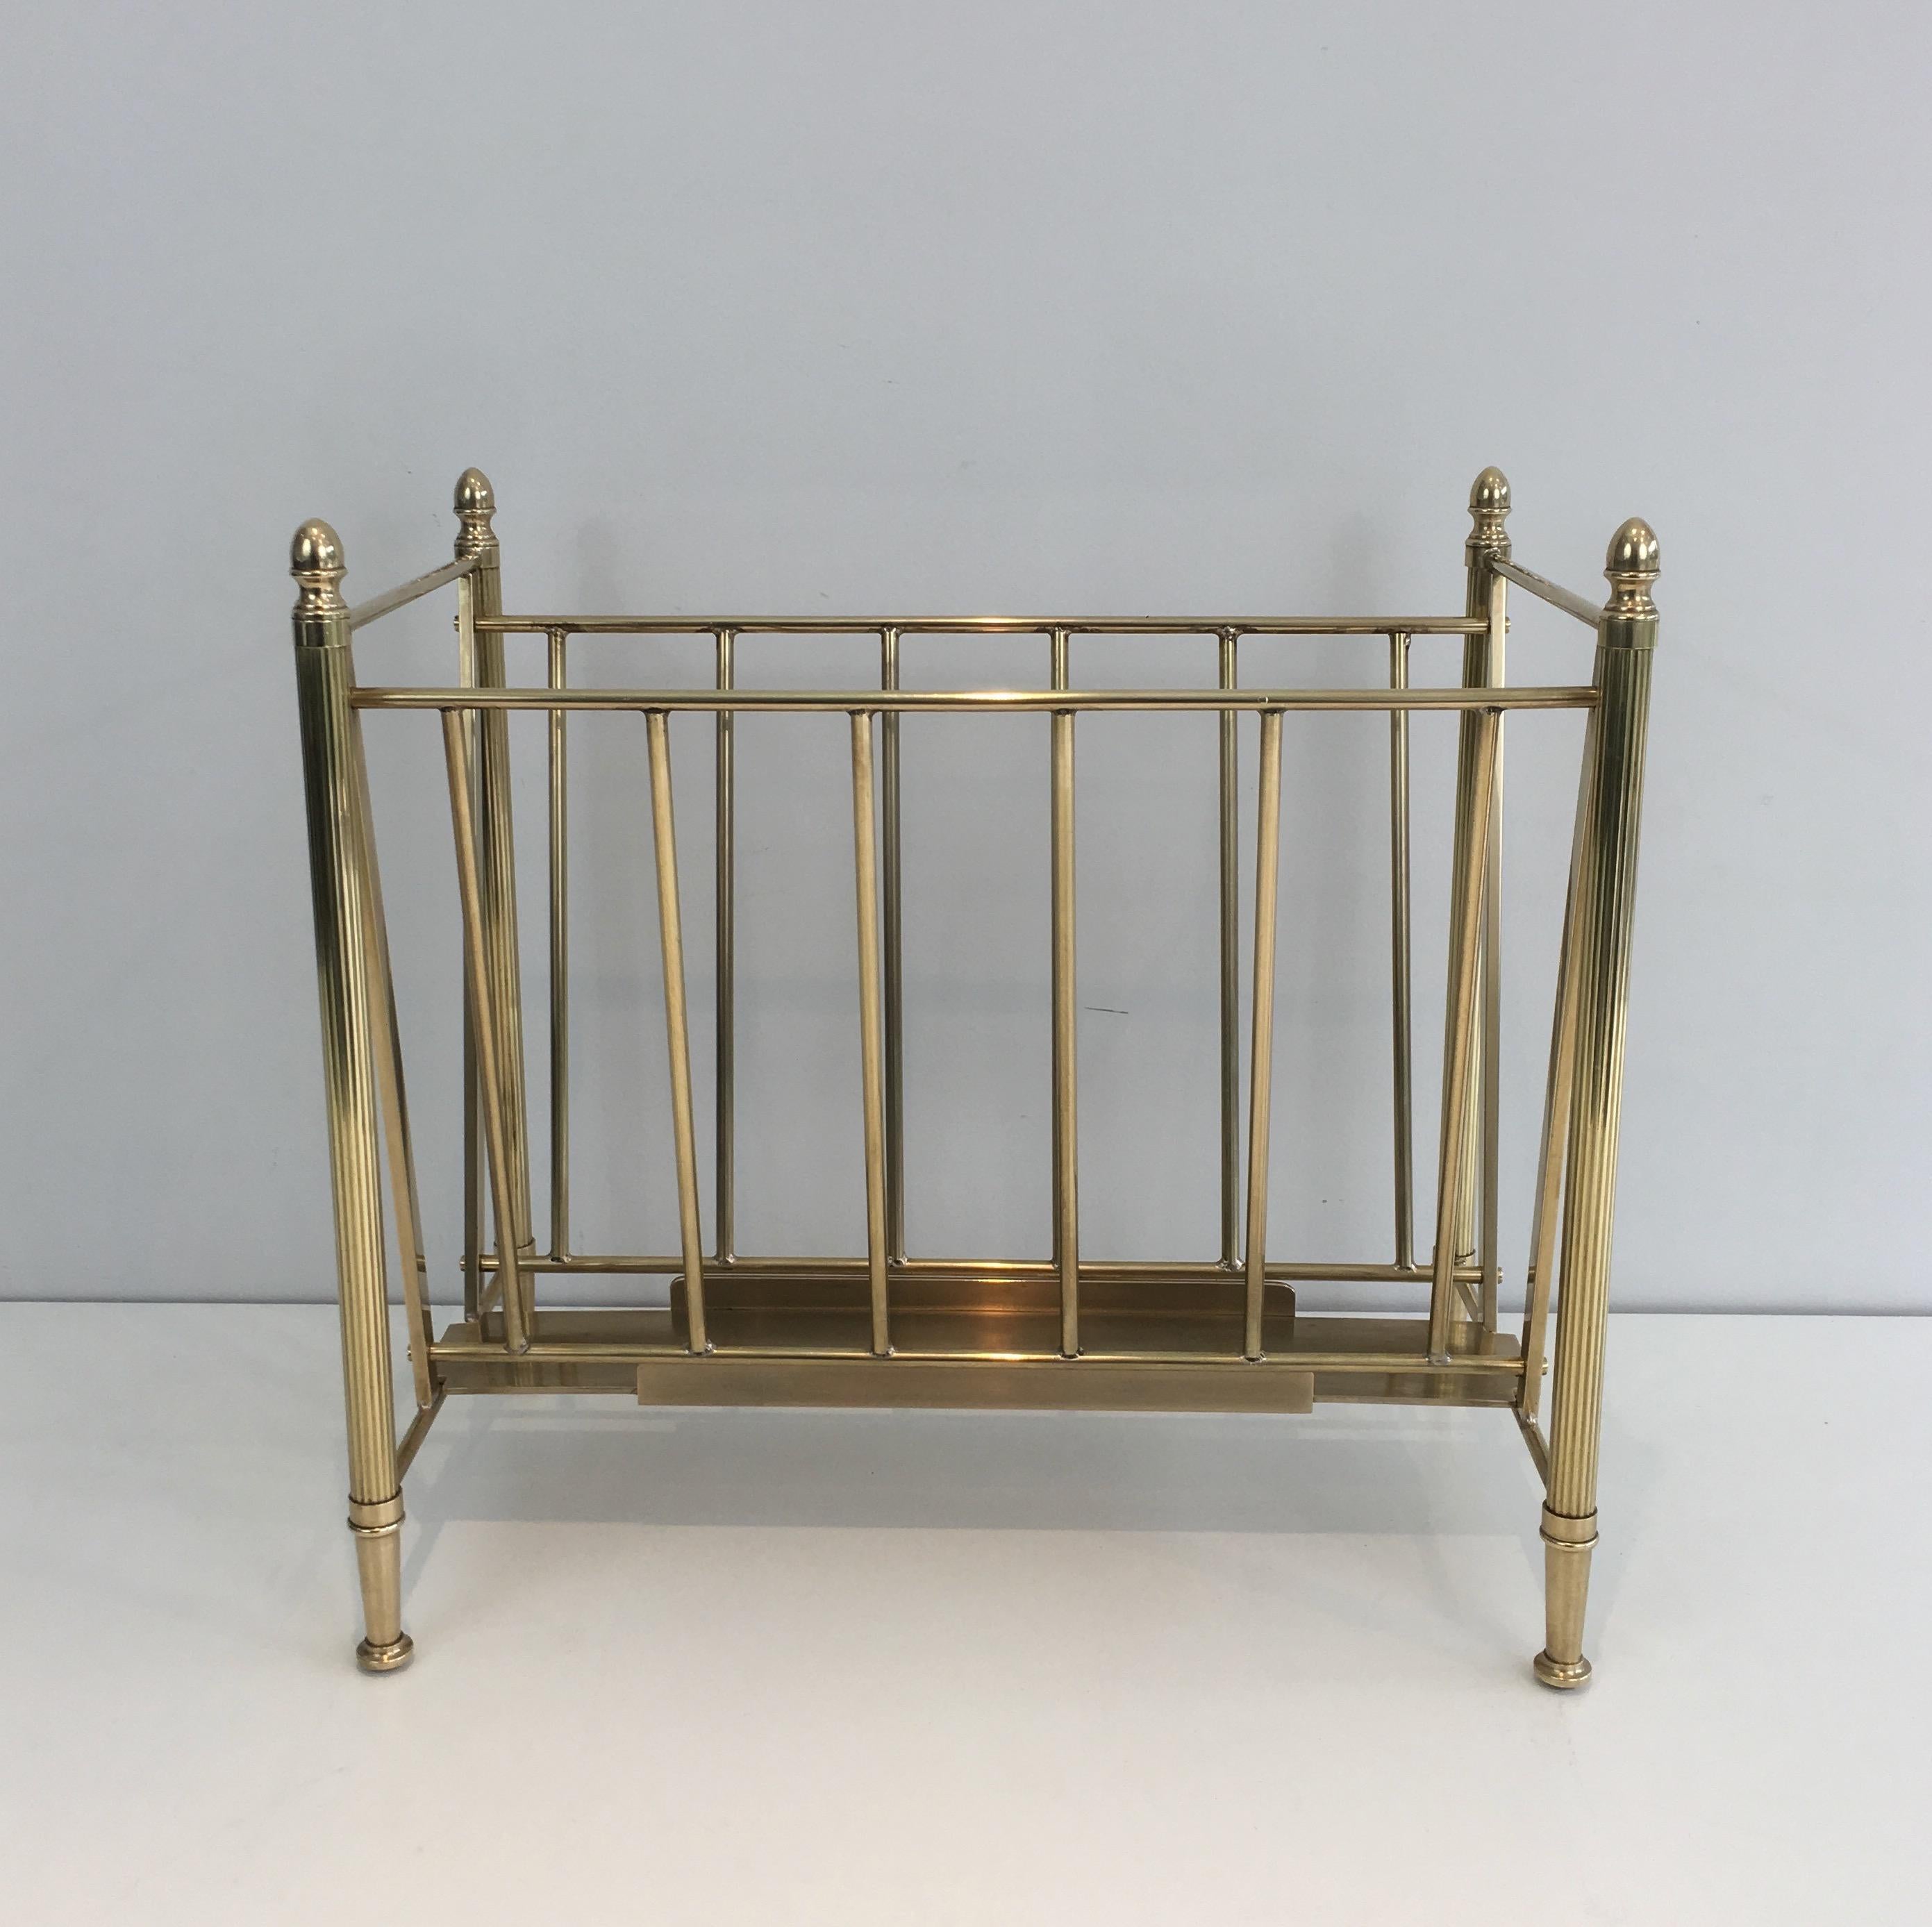 This nice neoclassical magazine rack is made of brass. This is a very nice model which quality is really good. This is a French work, attributed to famous French designer Maison Jansen, circa 1940.